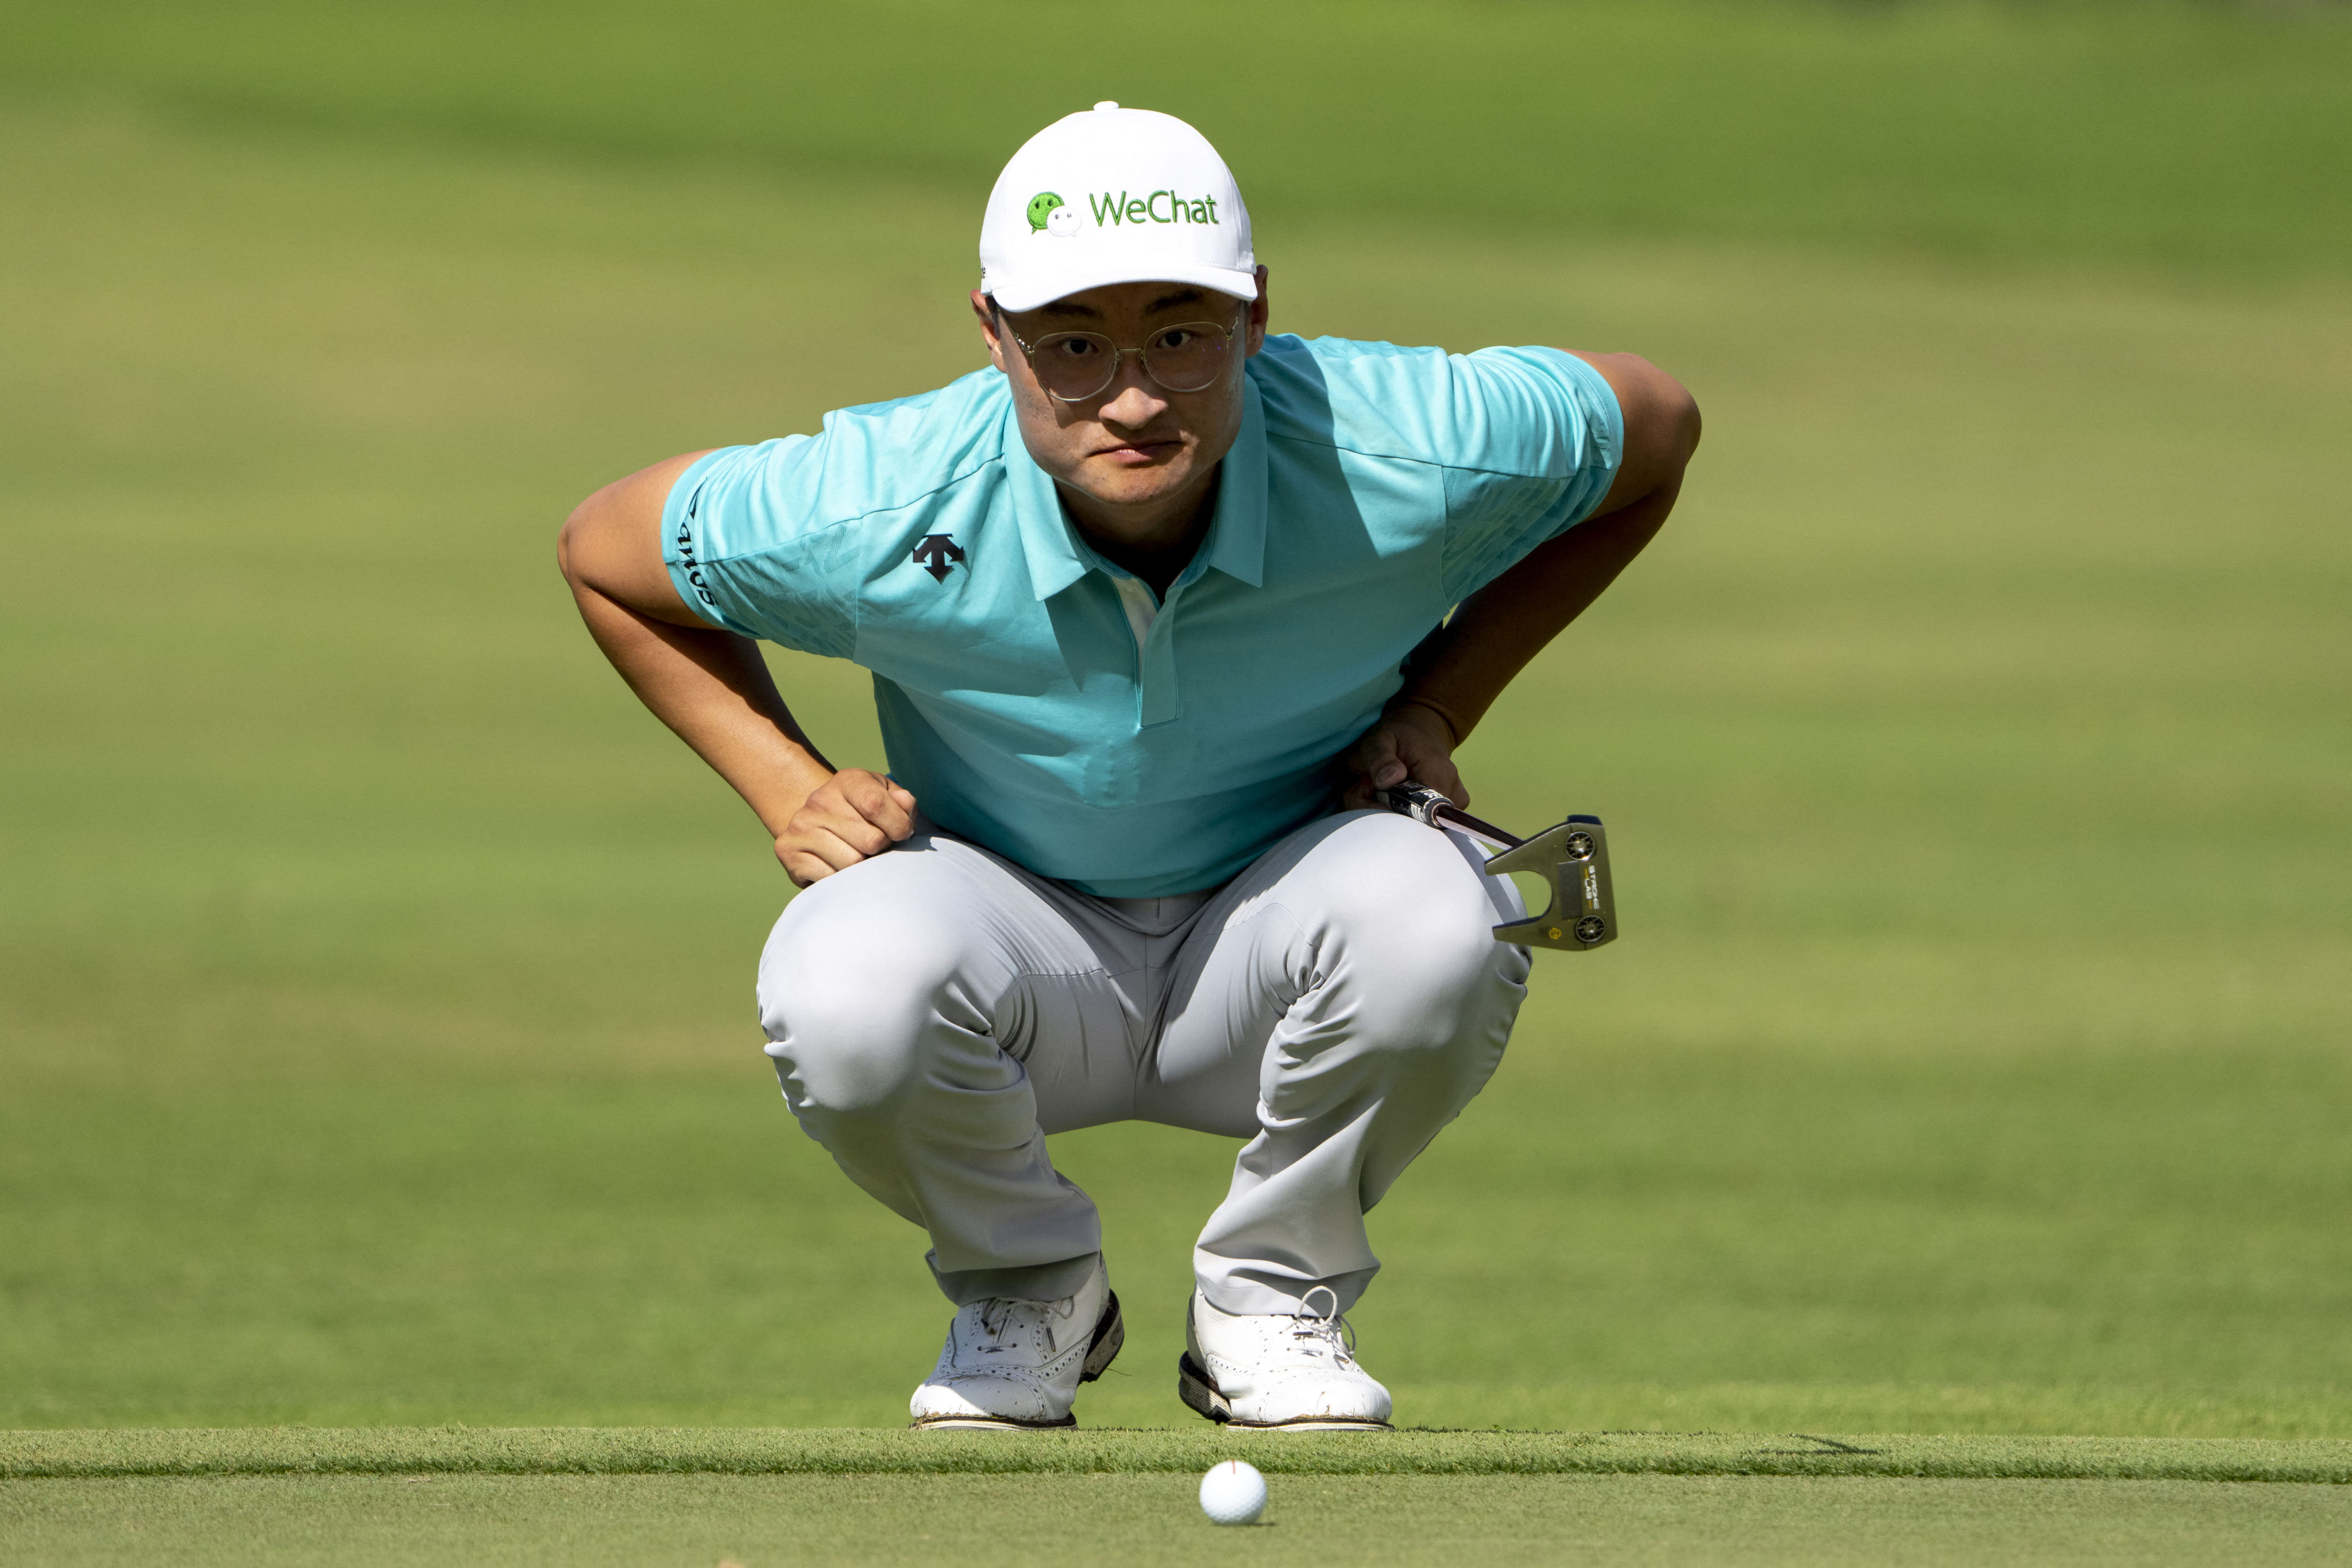 tilbagemeldinger Selvrespekt beviser PGA Tour: Martin stretches lead to two shots at Corales Puntacana  Championship, as China's Li Haotong suffers meltdown | South China Morning  Post